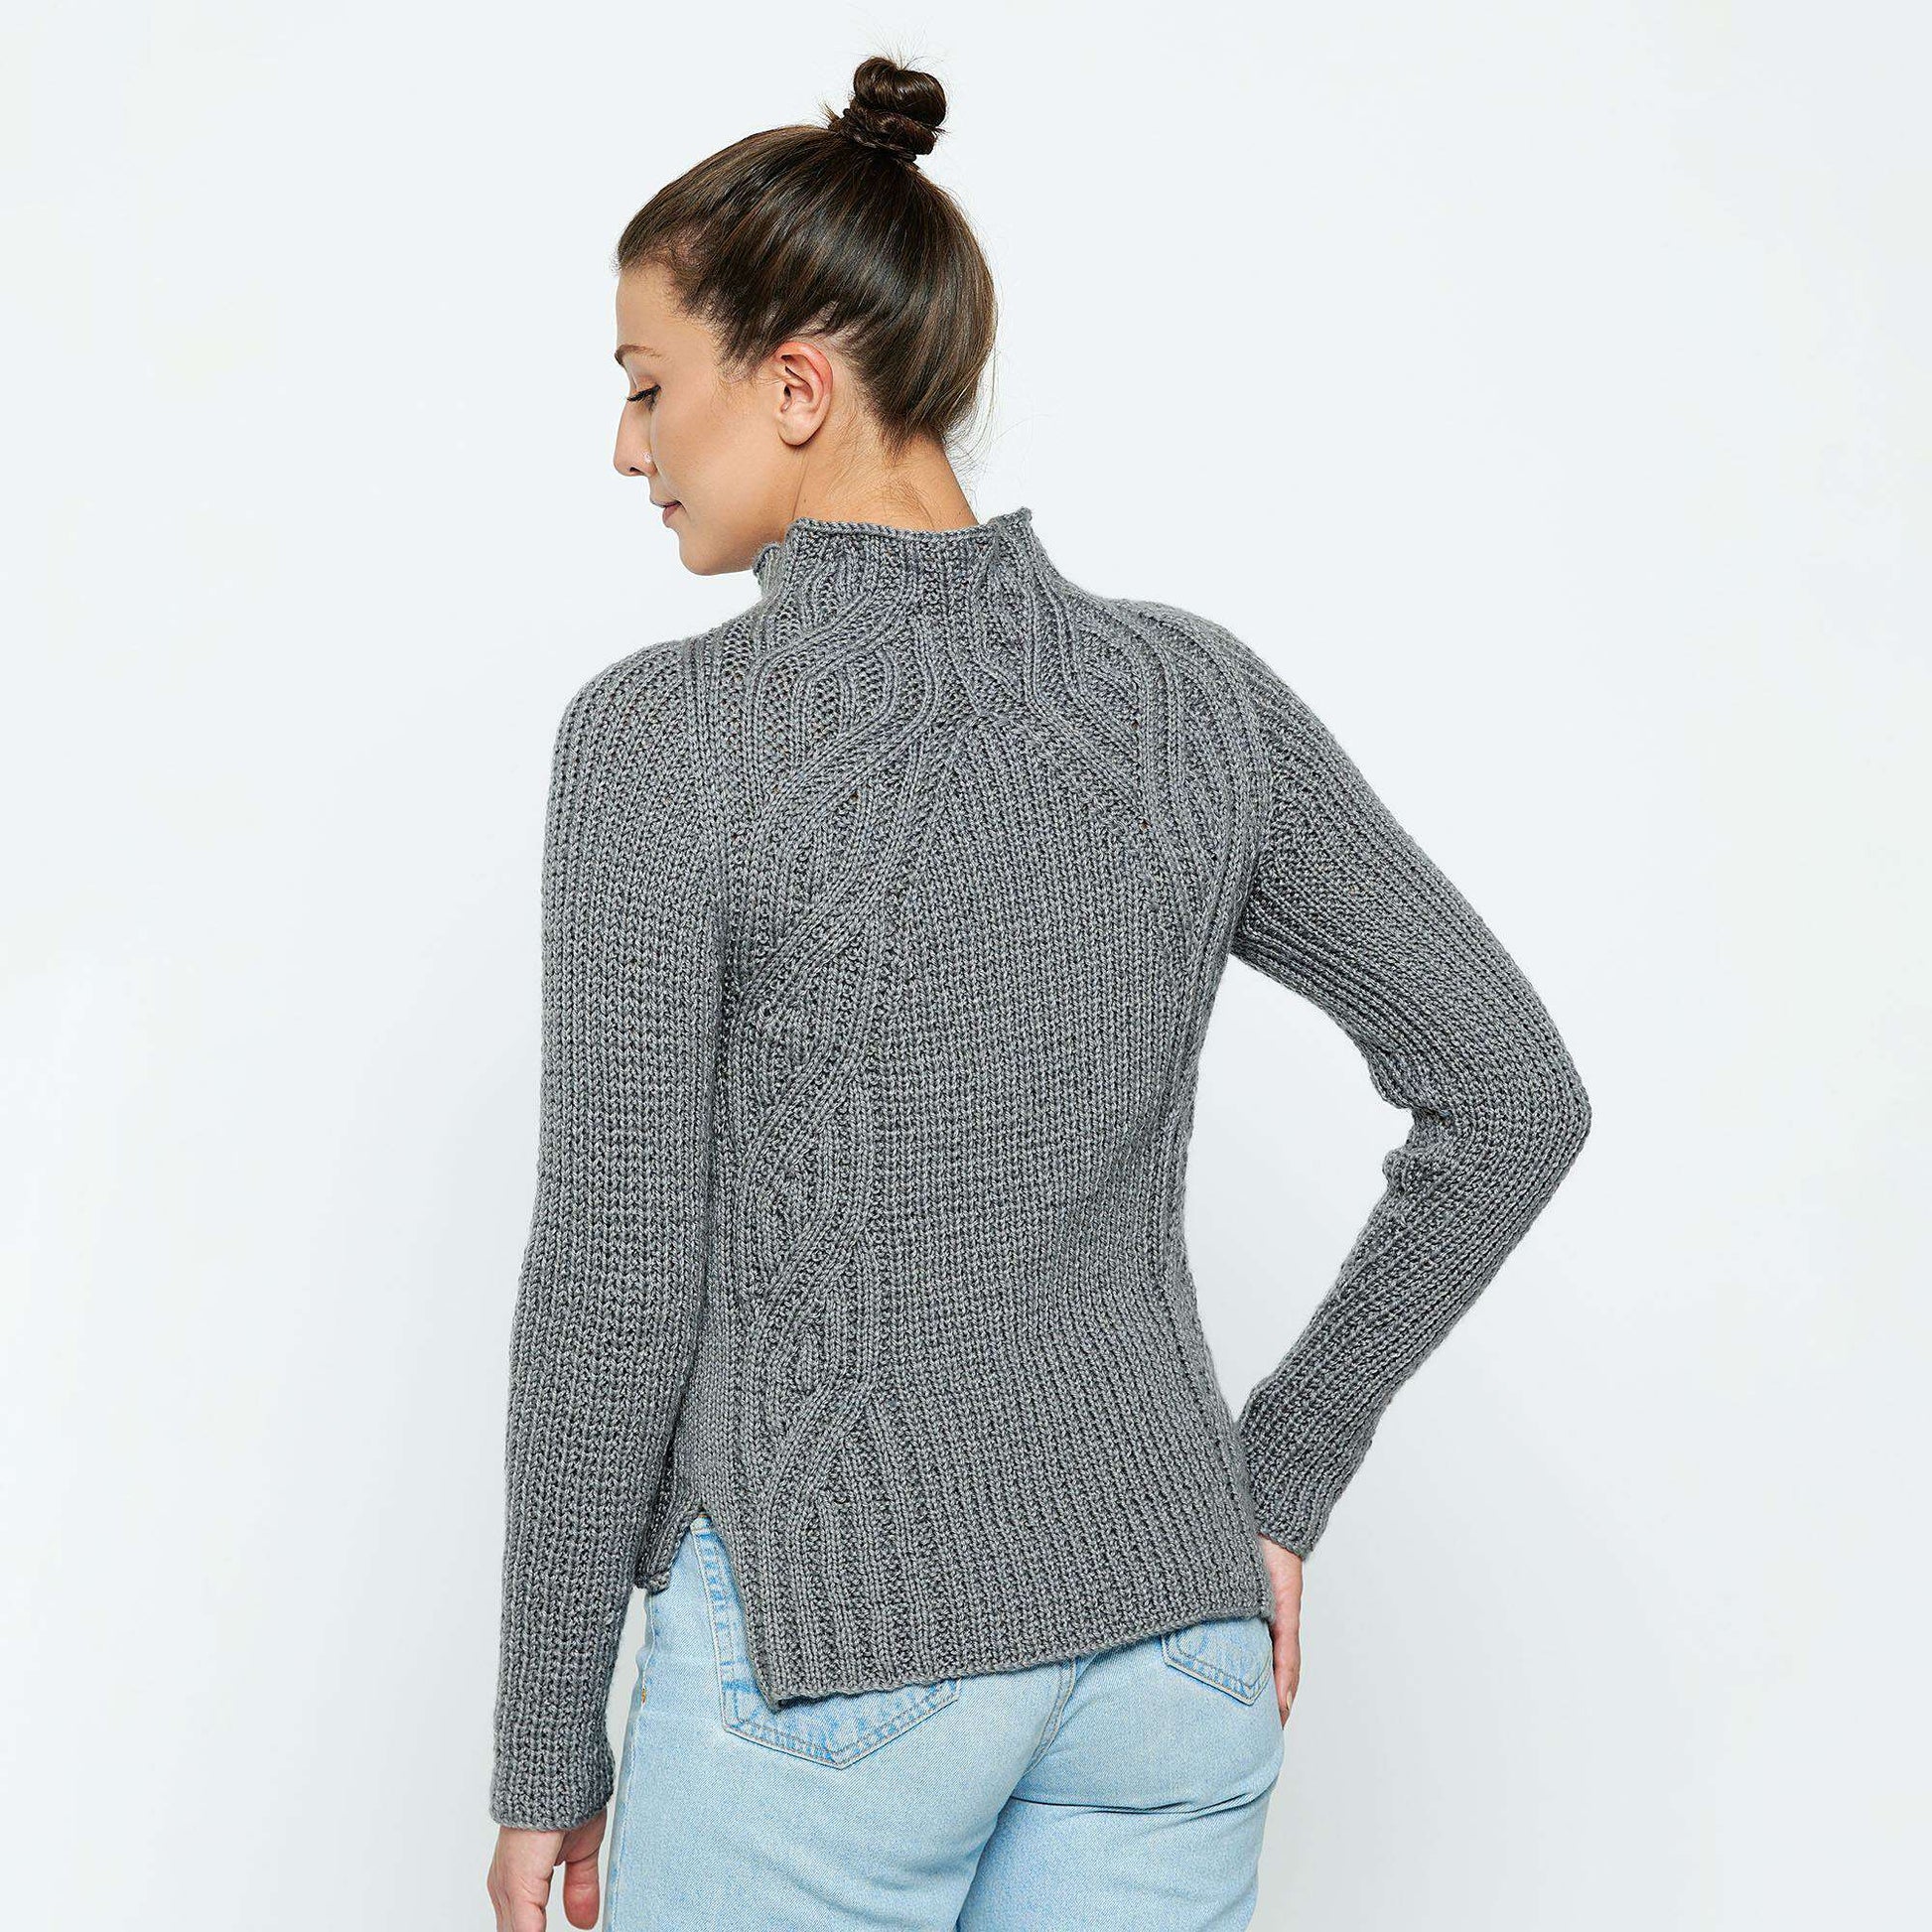 Free Bernat New Directional Cables Sweater Knit Pattern